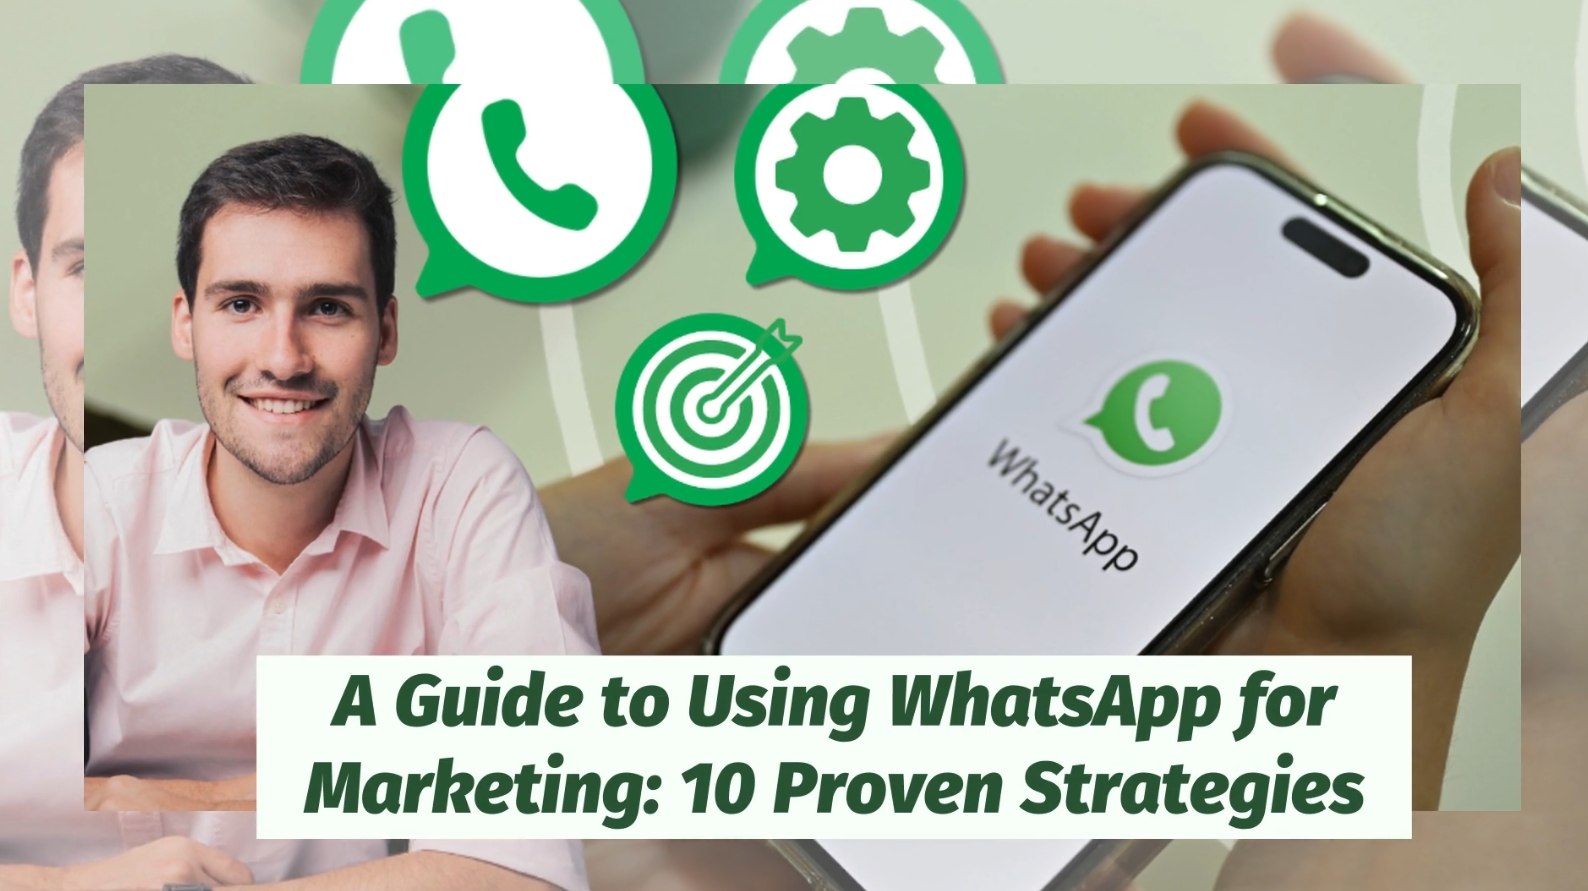 A Guide to Using WhatsApp for Marketing: 10 Proven Strategies